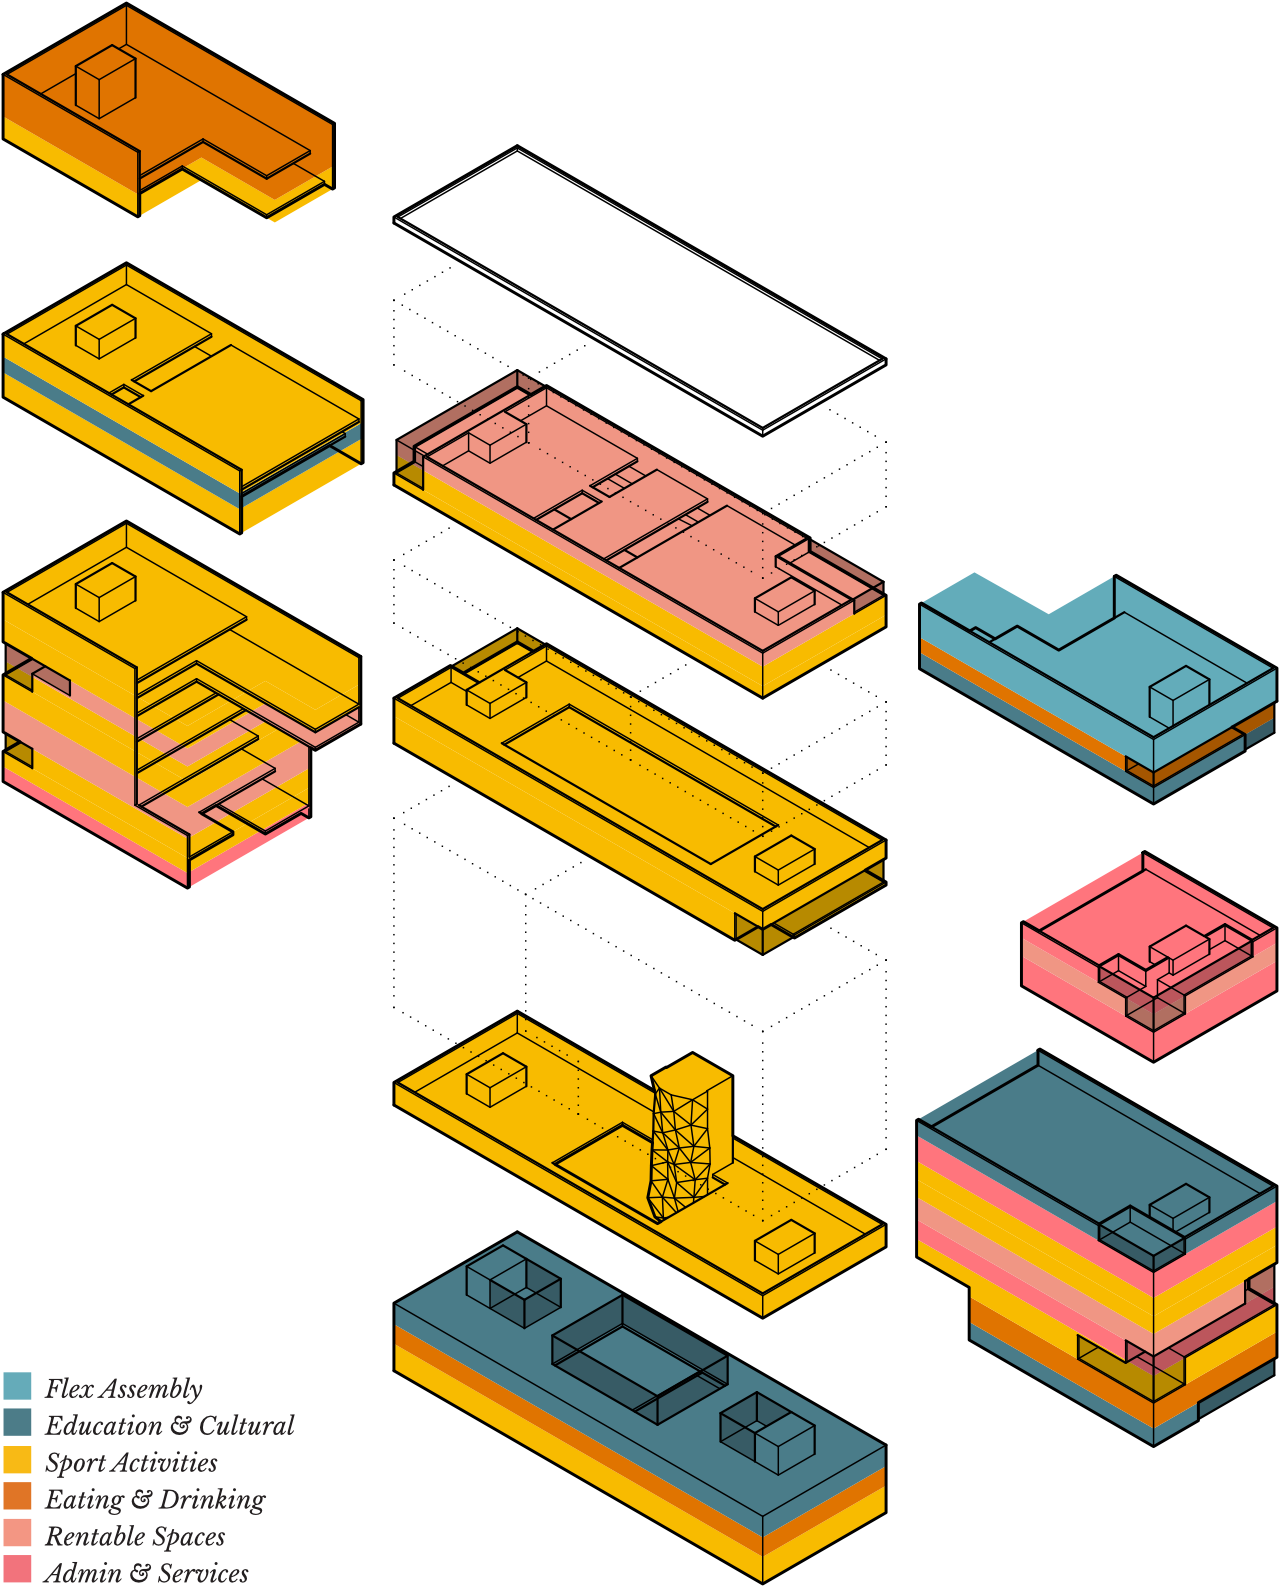 An exploded axonometric view of the building, broken apart into different segments